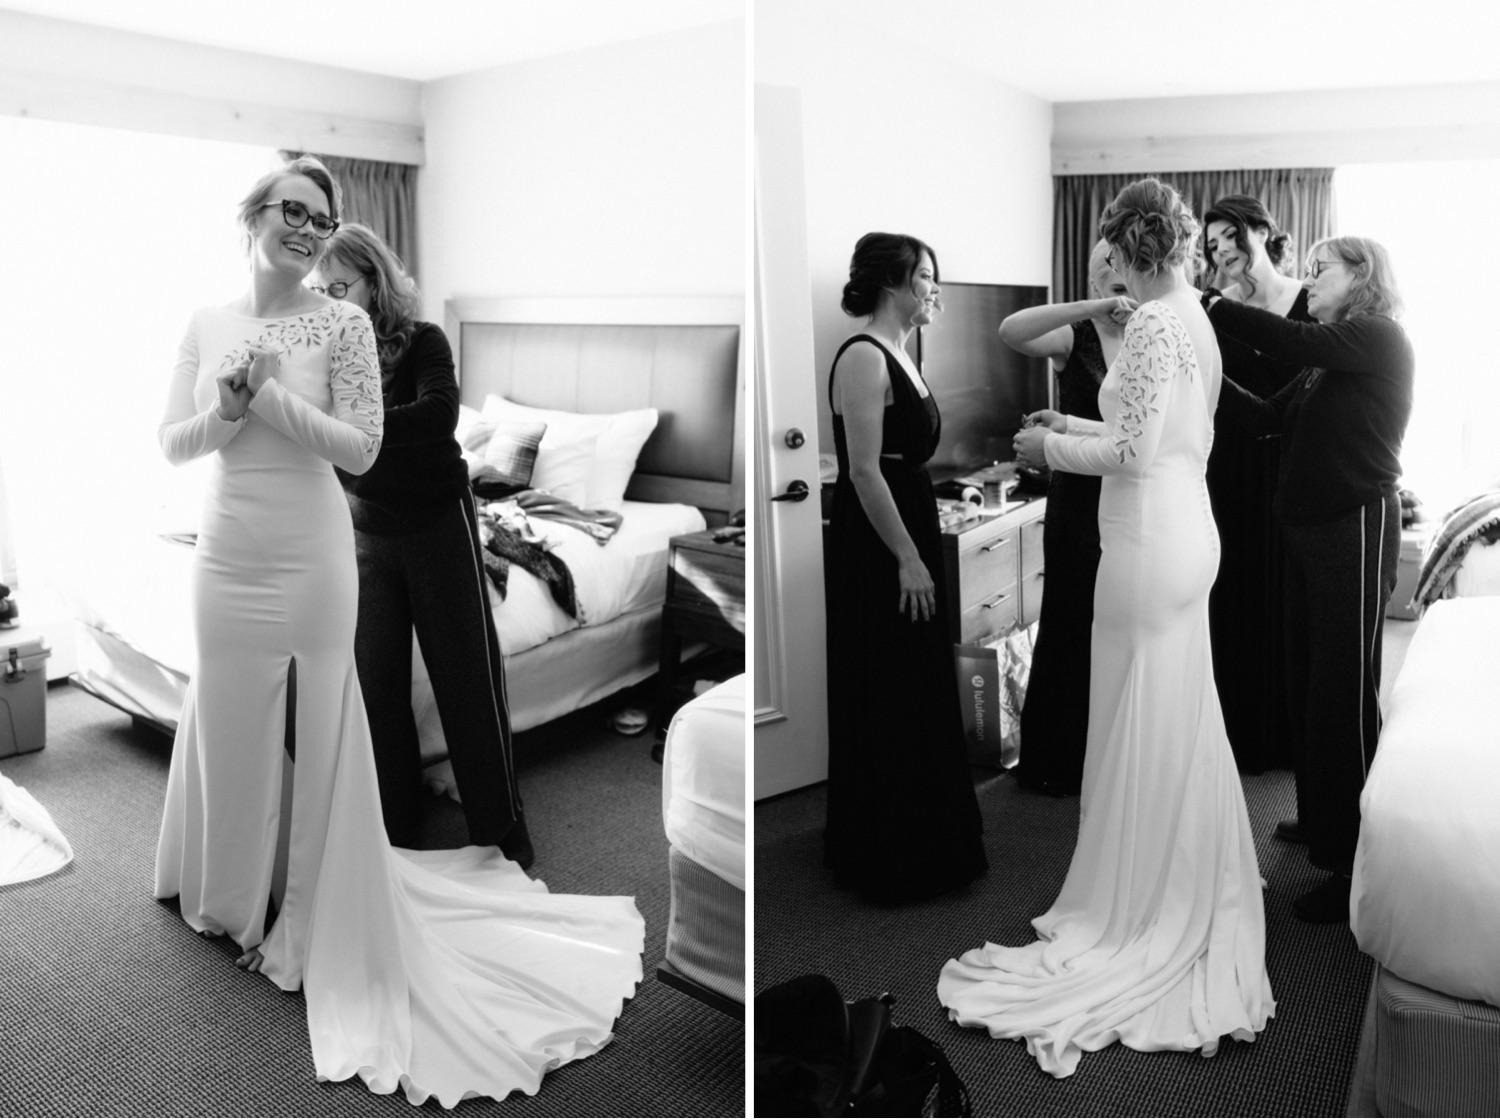 The bride clasping her hands and happily looking at her bridesmaids as her Pronovias dress is put on